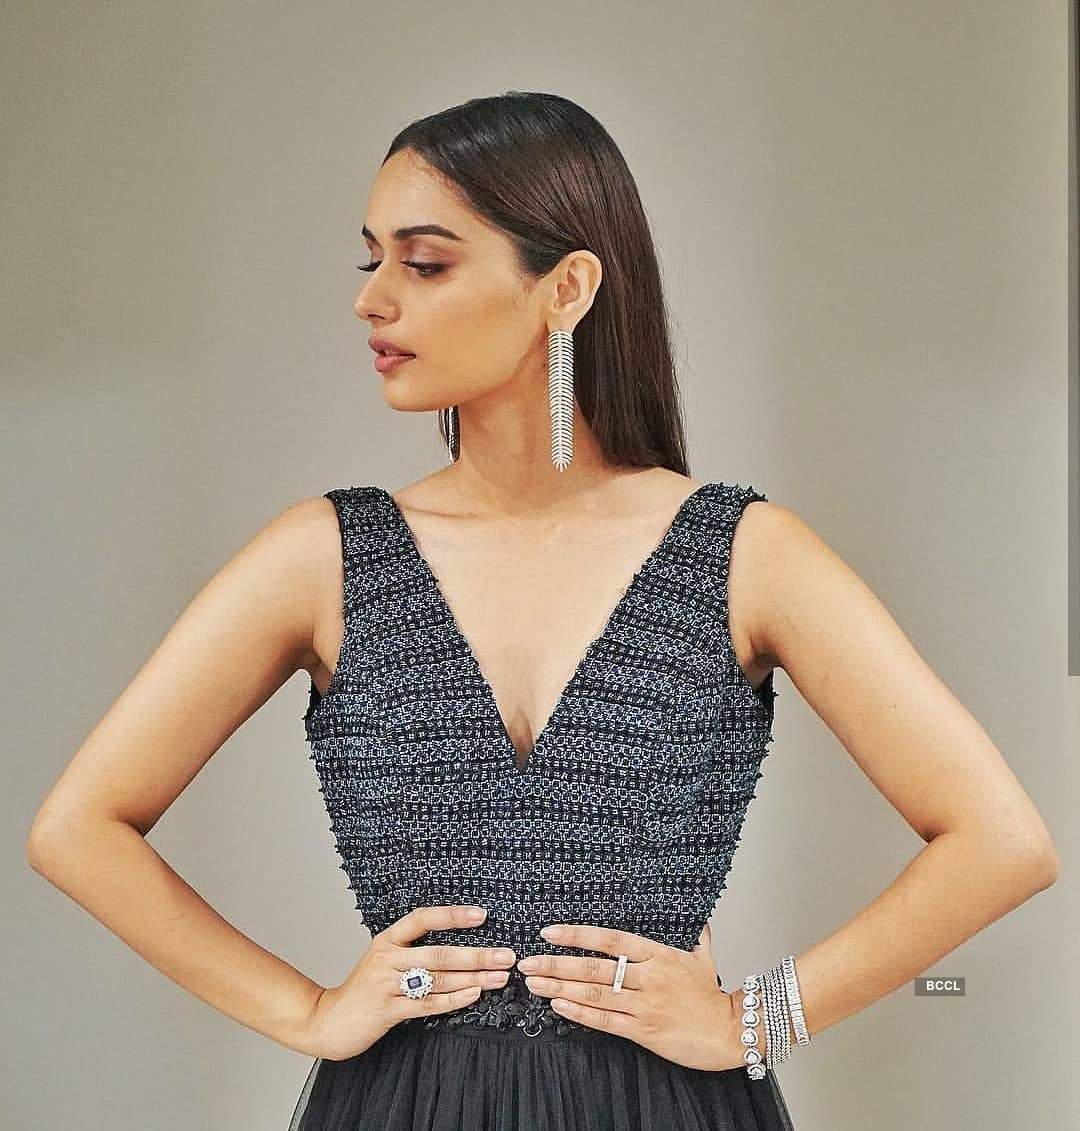 Miss World Manushi Chhillar becomes Times Most Desirable Woman of 2017